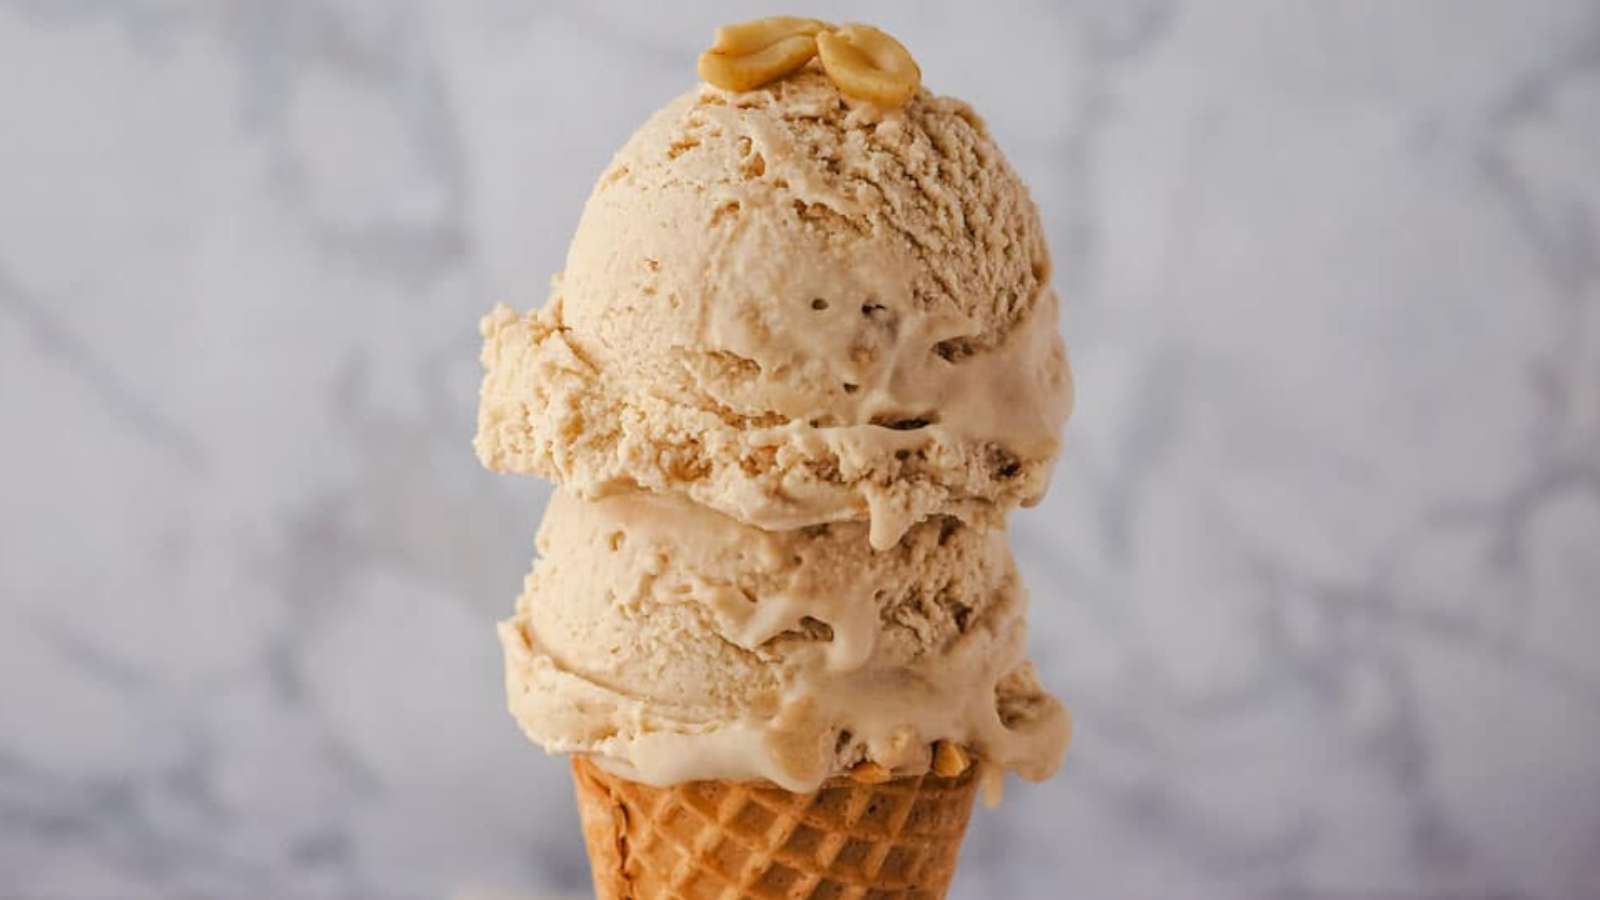 Peanut Butter Ice Cream recipe by Keep Calm and Eat Ice Cream.